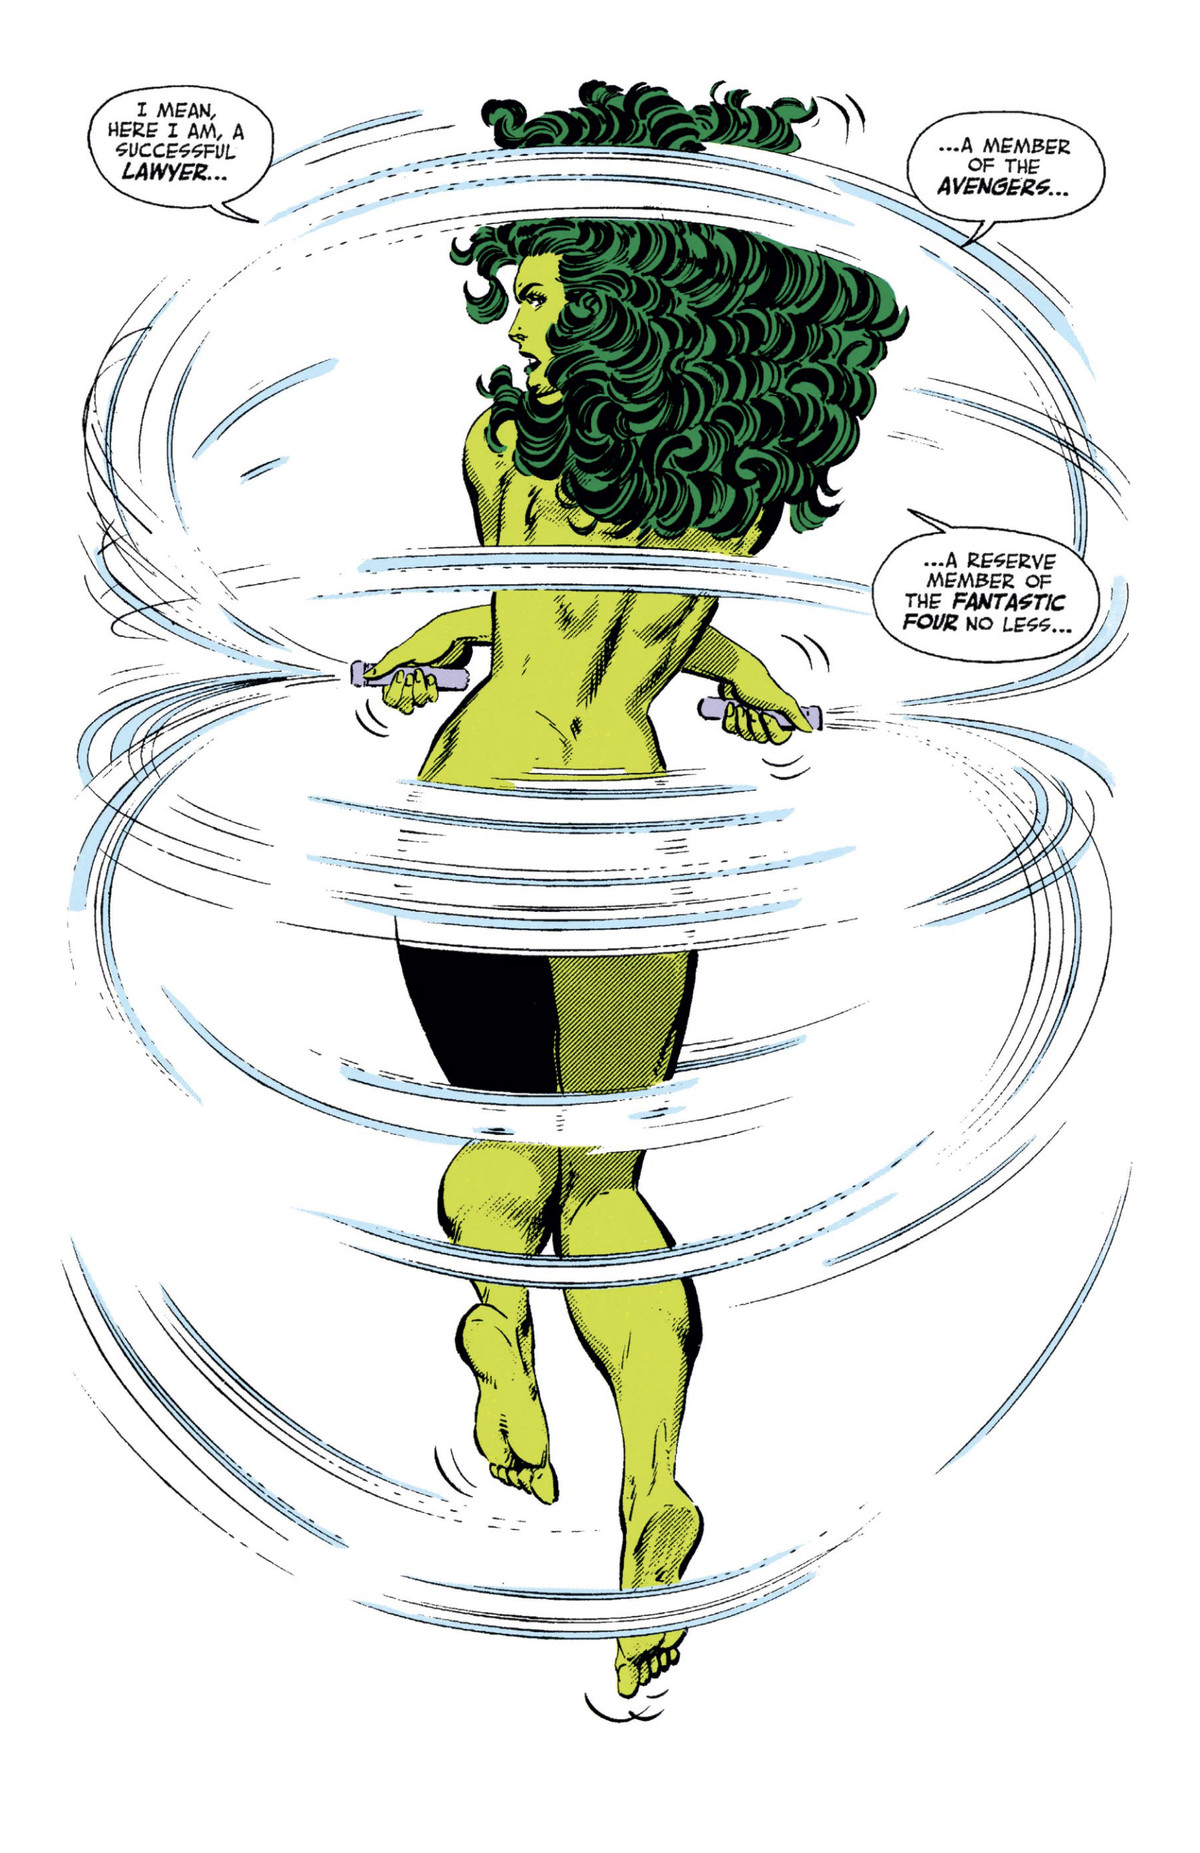 Her back to the camera, She-Hulk jumps rope while naked, the speed blurs of the ropes obscuring her butt, all the while complaining “I mean, here I am, a successful lawyer, a member of the Avengers, a reserve member of the Fantastic Four no less...” in Sensational She-Hulk #40 (1992). 